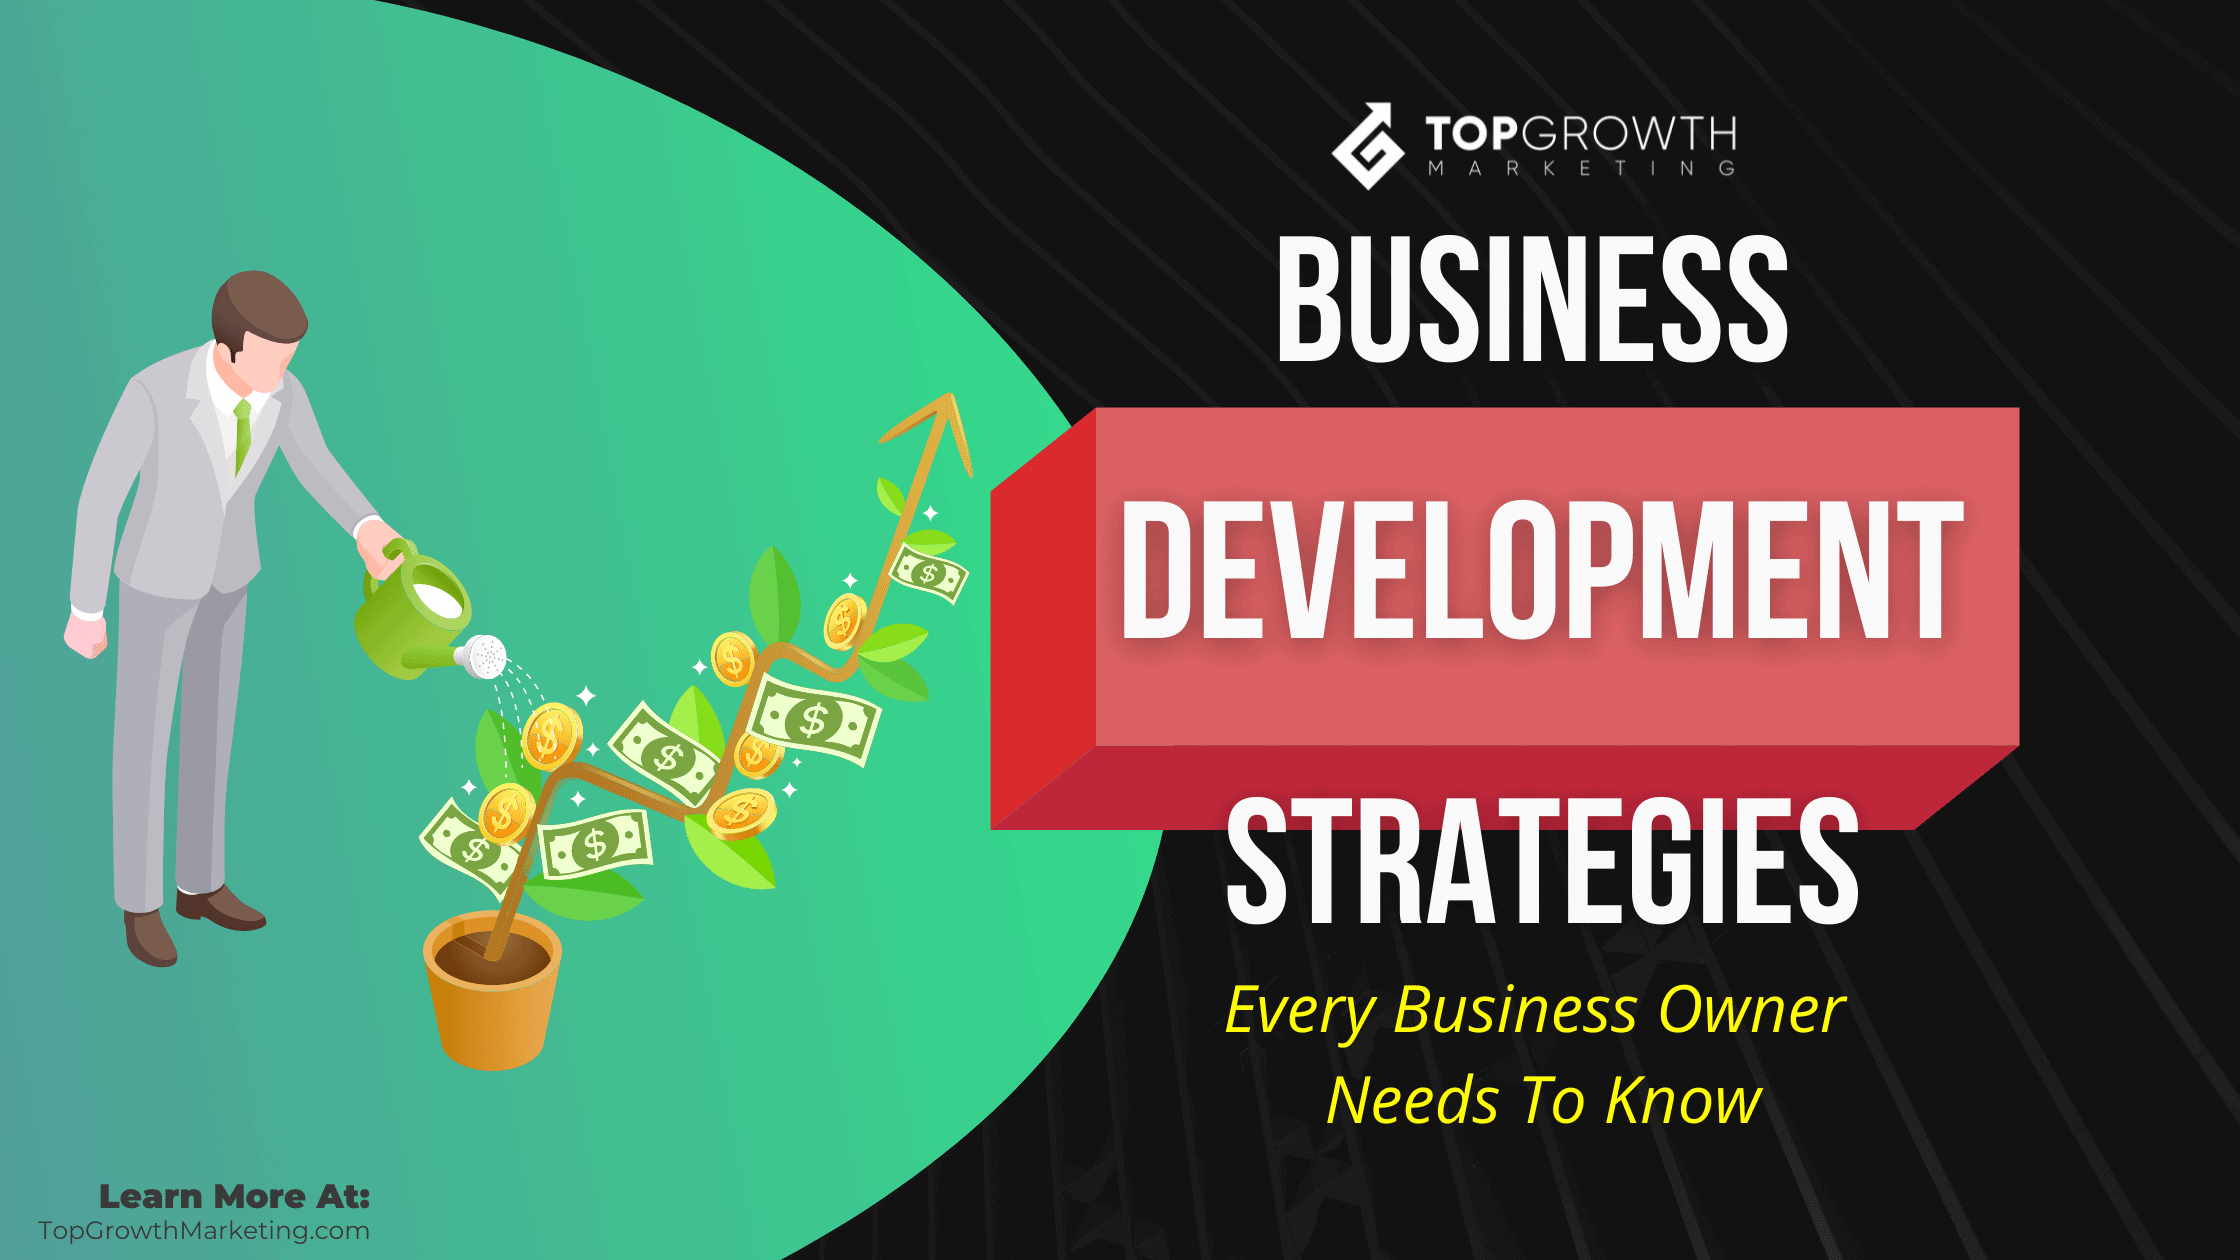 Business Growth Strategies That Every Business Owner Needs to Know